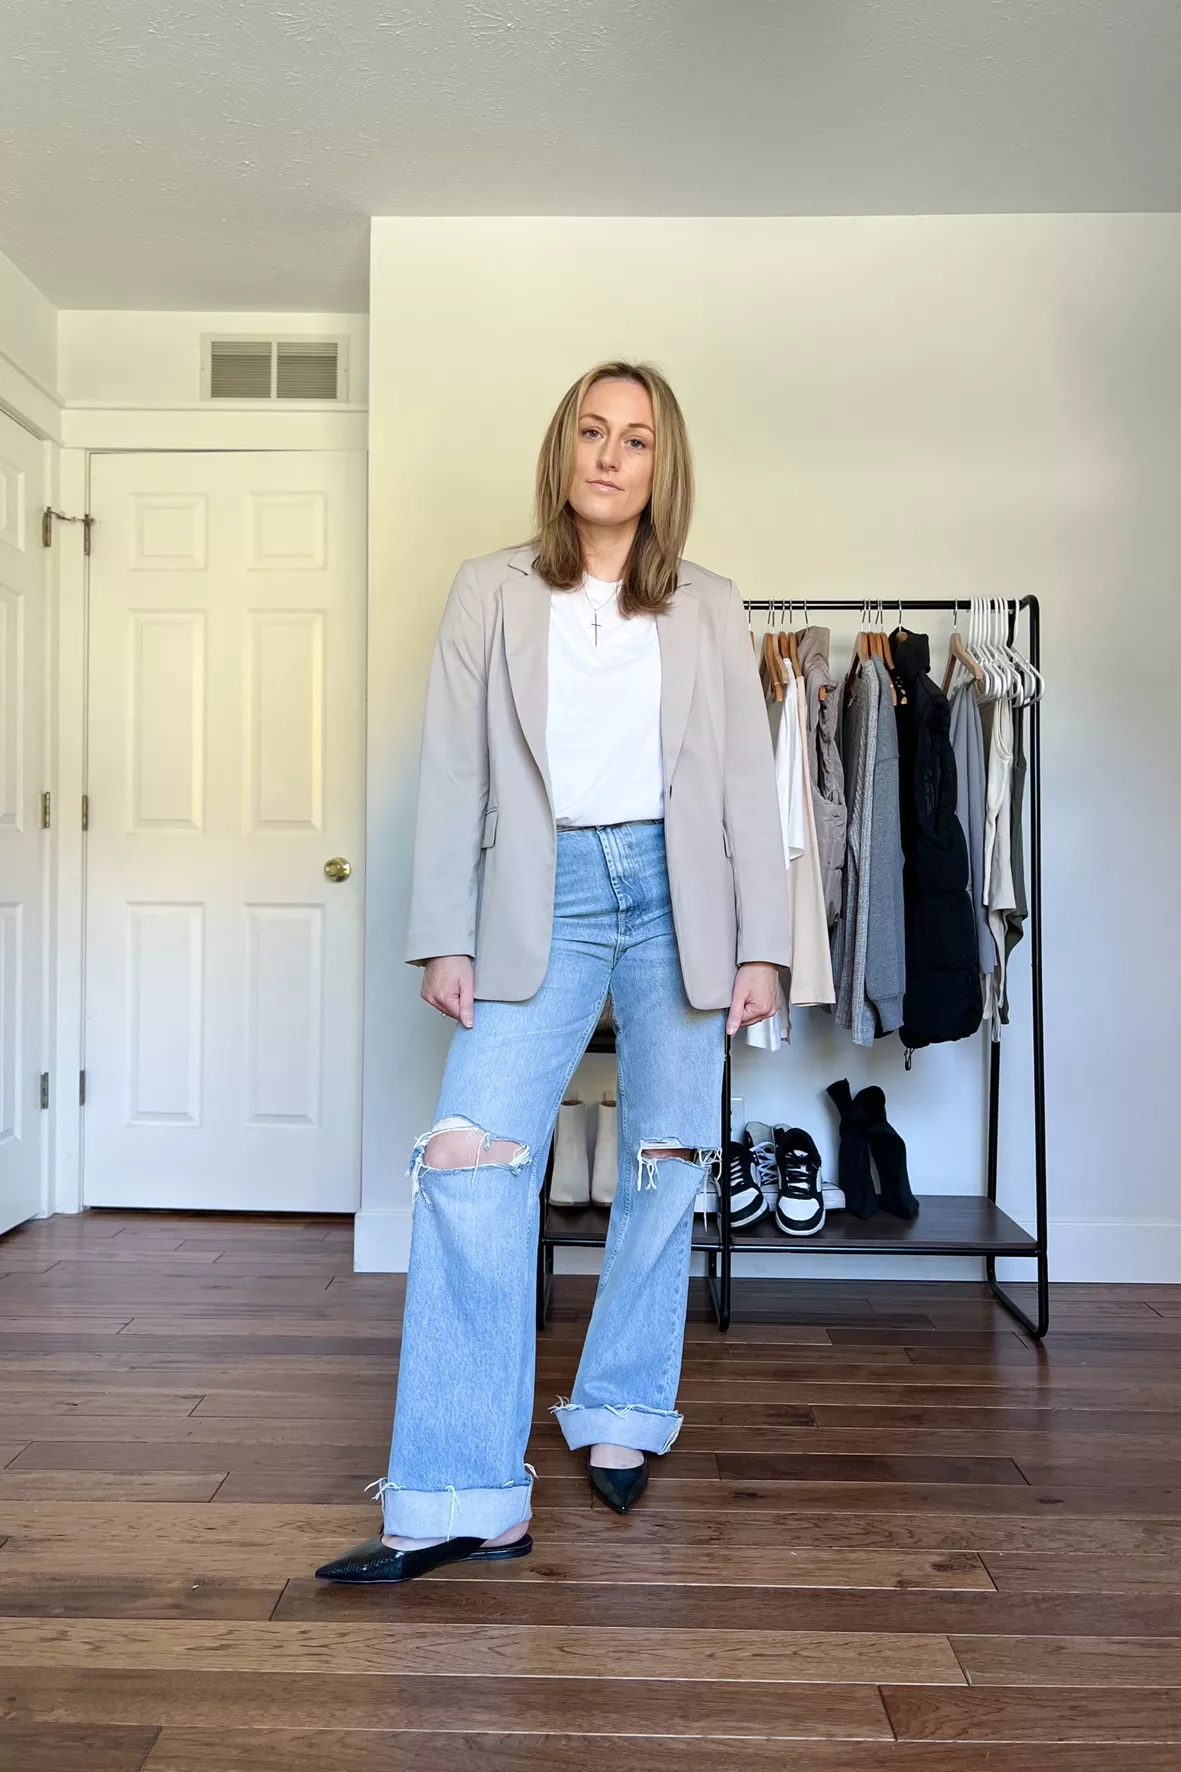 The Oversized Blazer curated on LTK